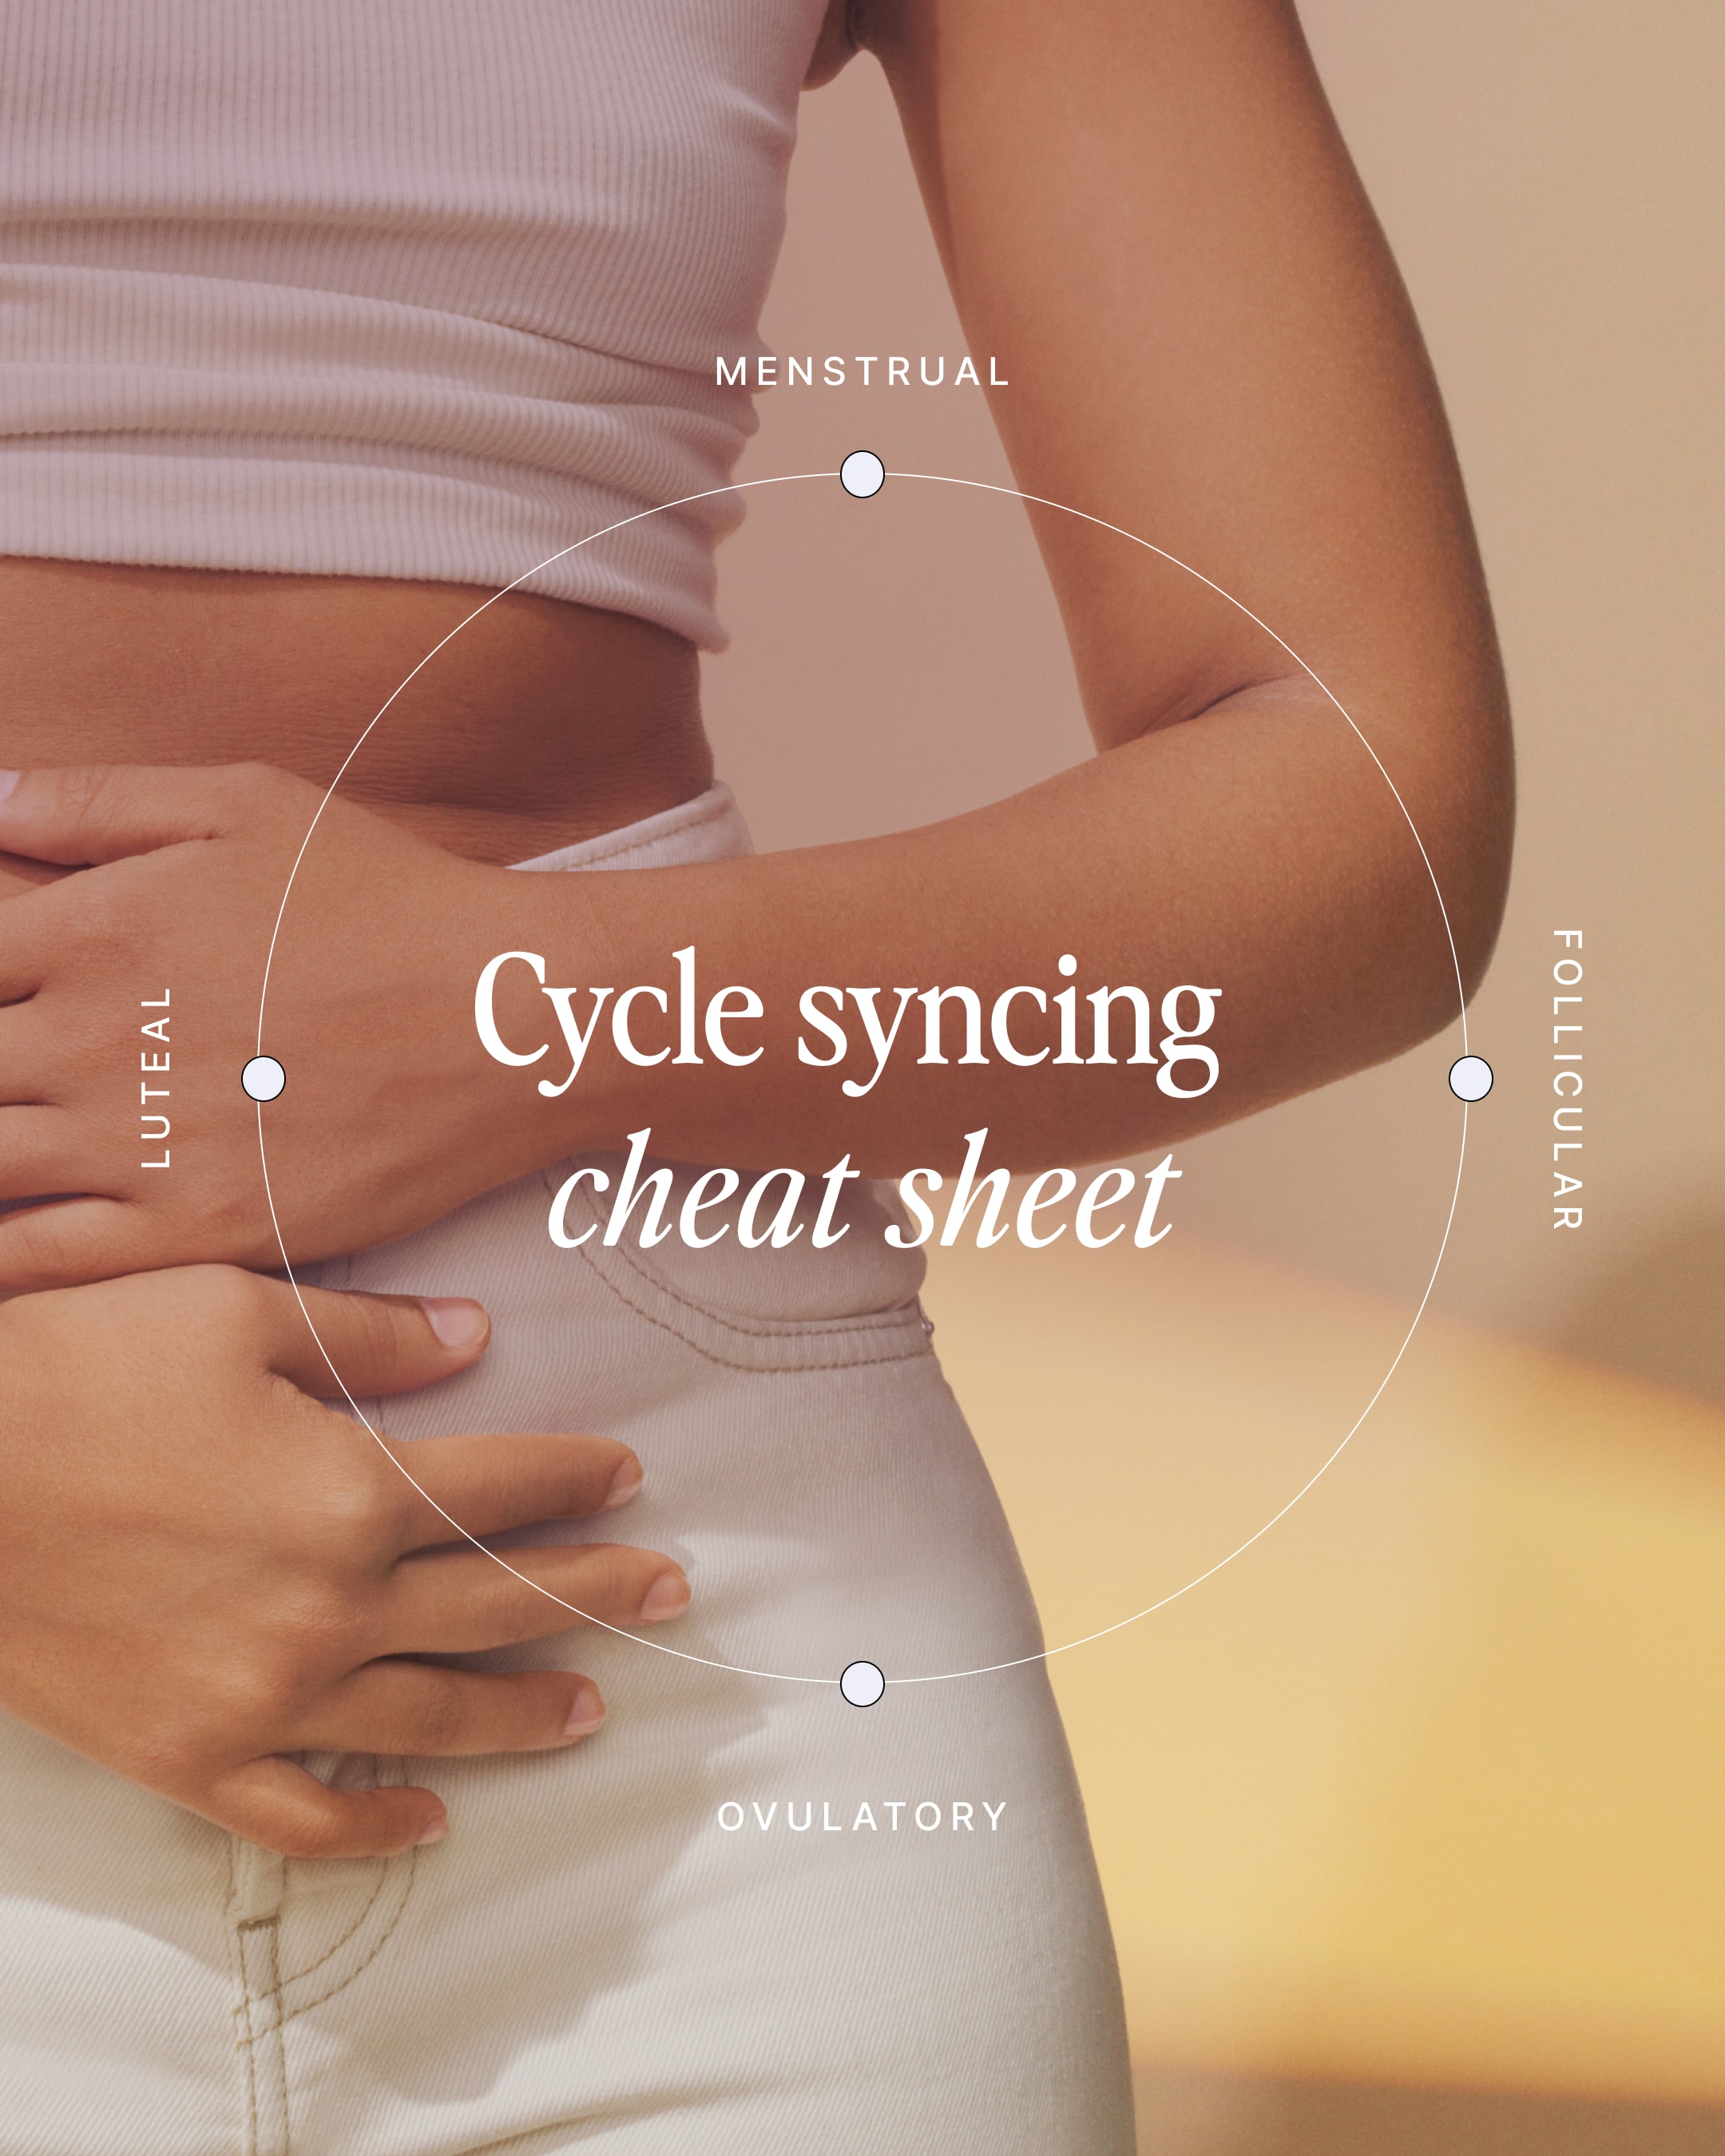 Cycle Sync' And Feel Better - HealthLinks SC